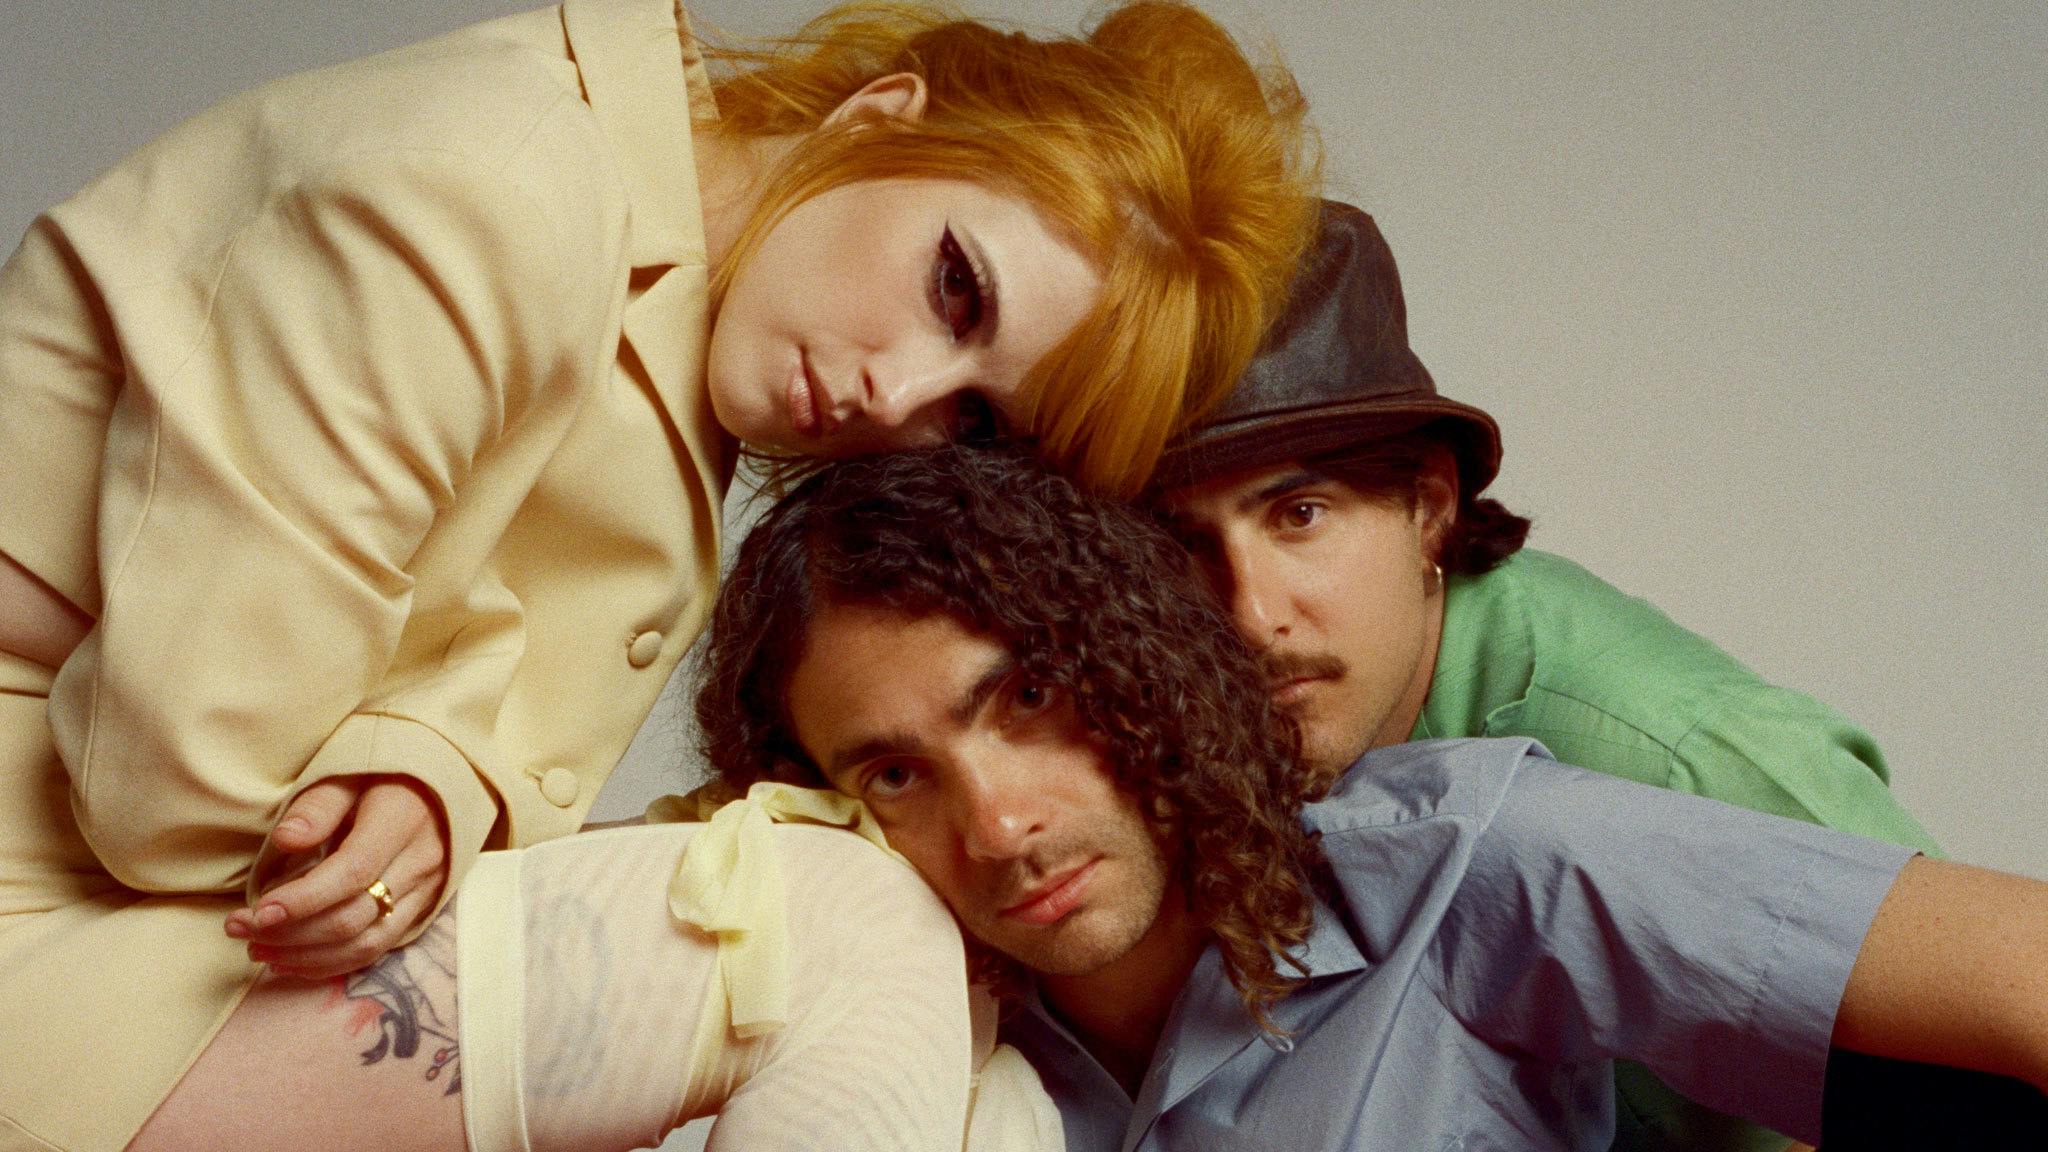 Listen to a snippet of Paramore’s new single The News